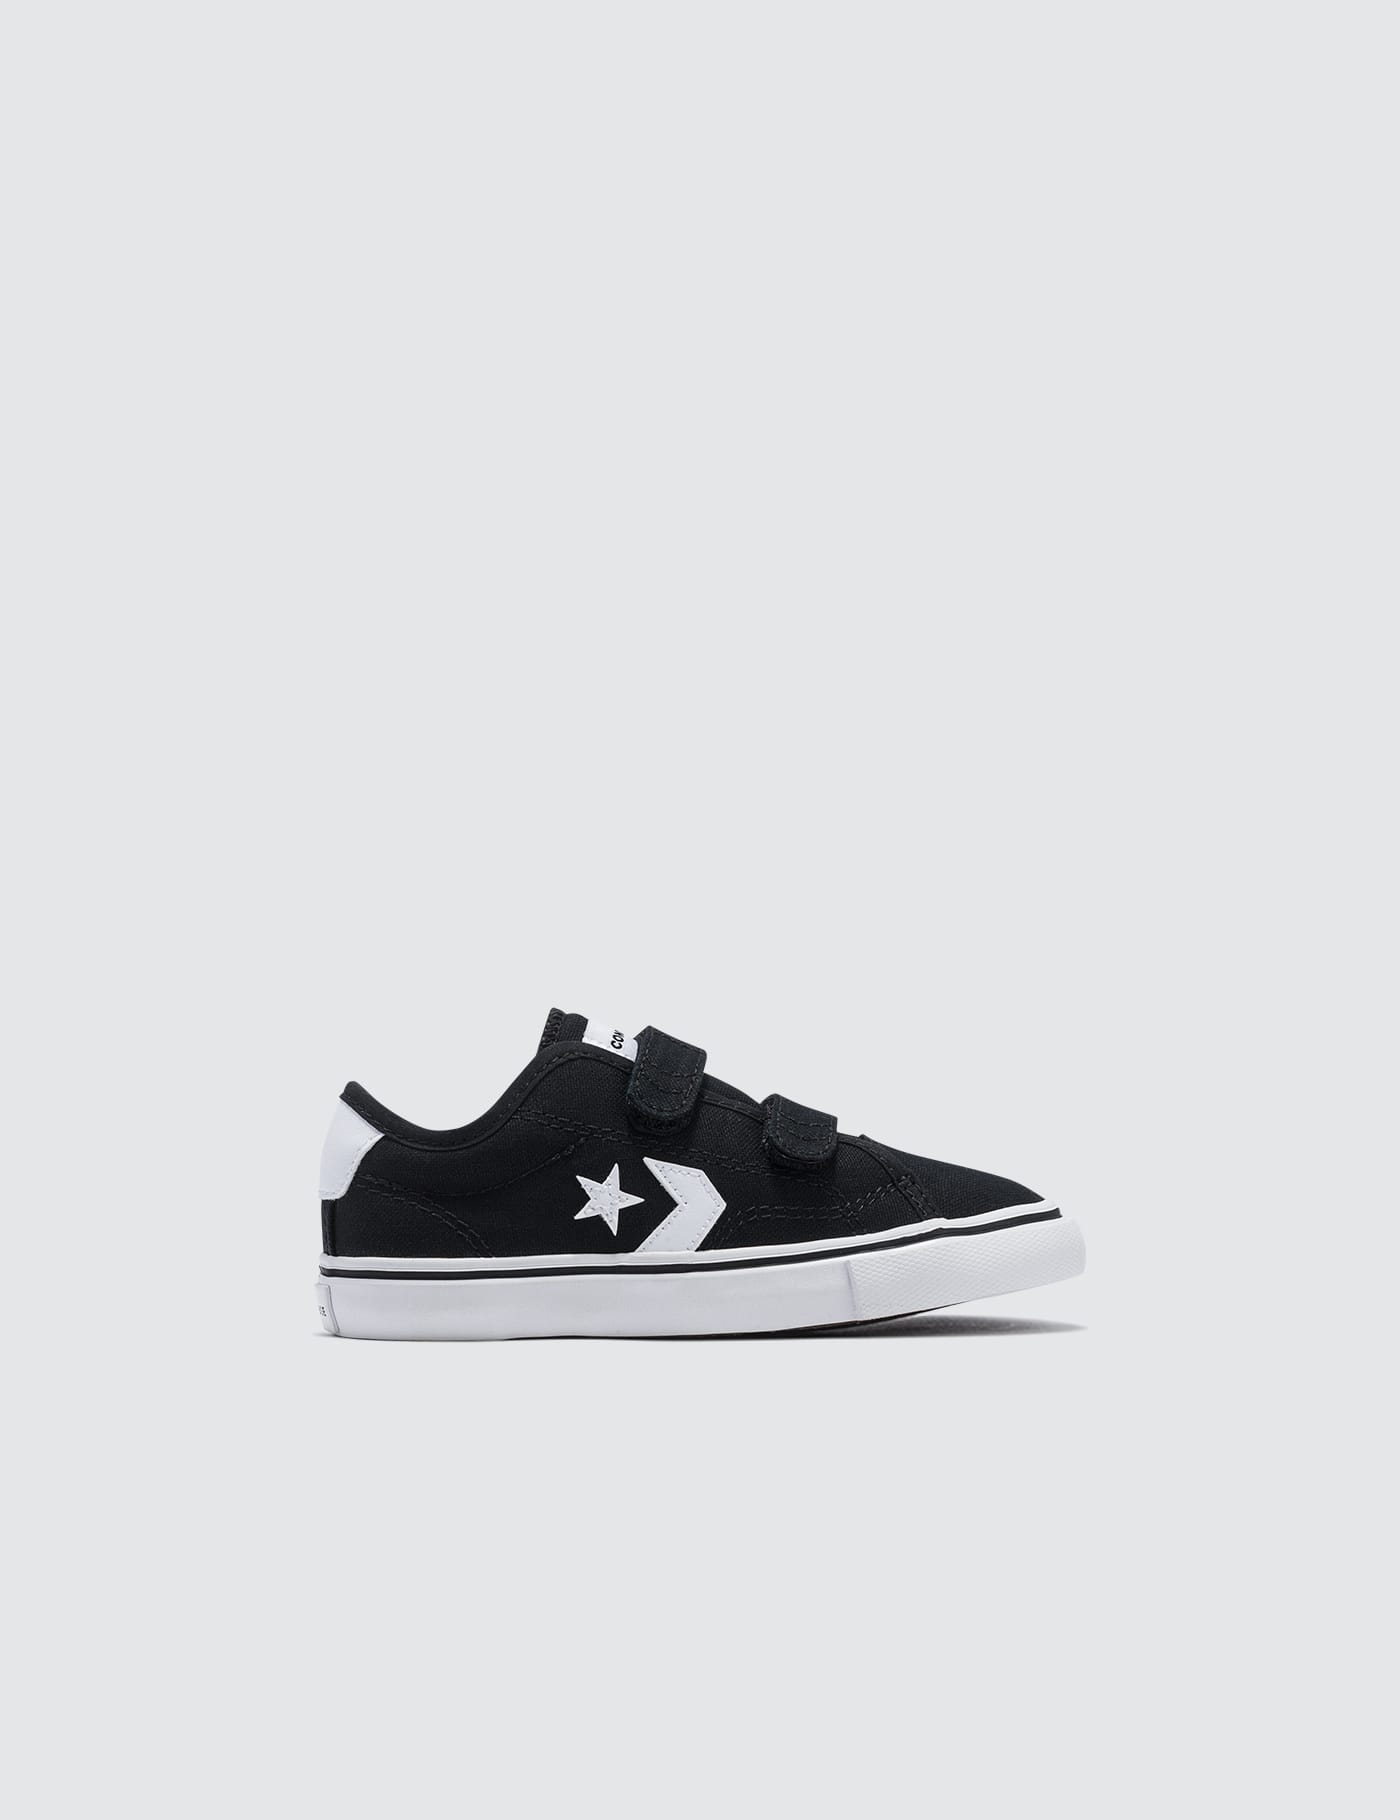 converse one star replay